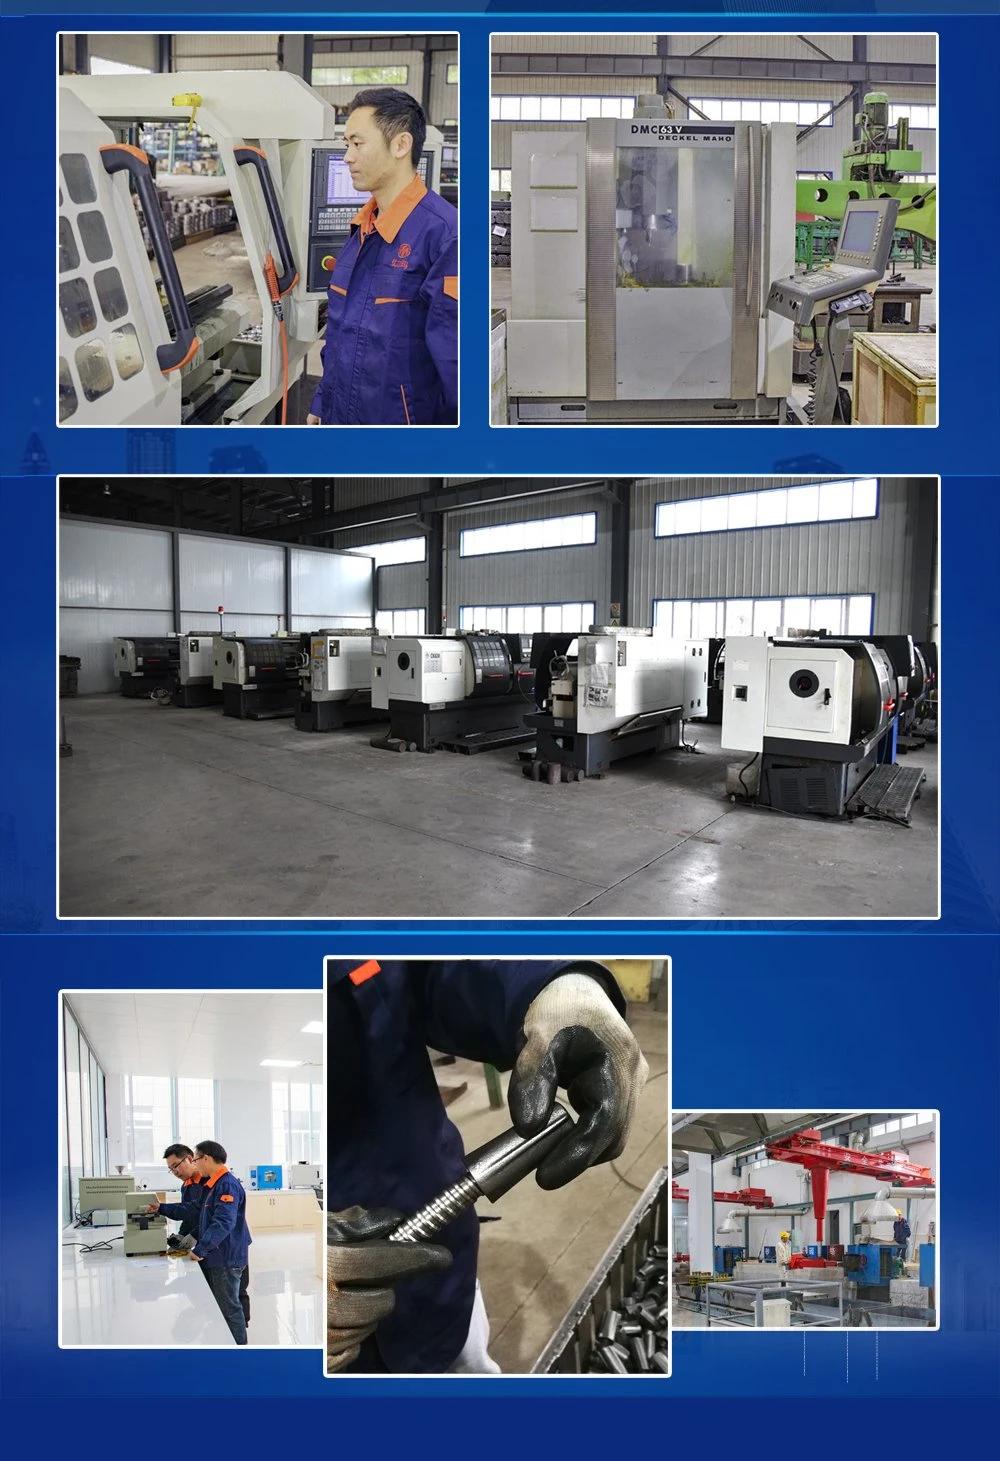 Casting,Forging,Machining,Accessories,Construction,Equipment,Power Fitting,Nuts,Warehouse,Decoration,Agriculture,Car,Railway,Underground,Nuts,Component